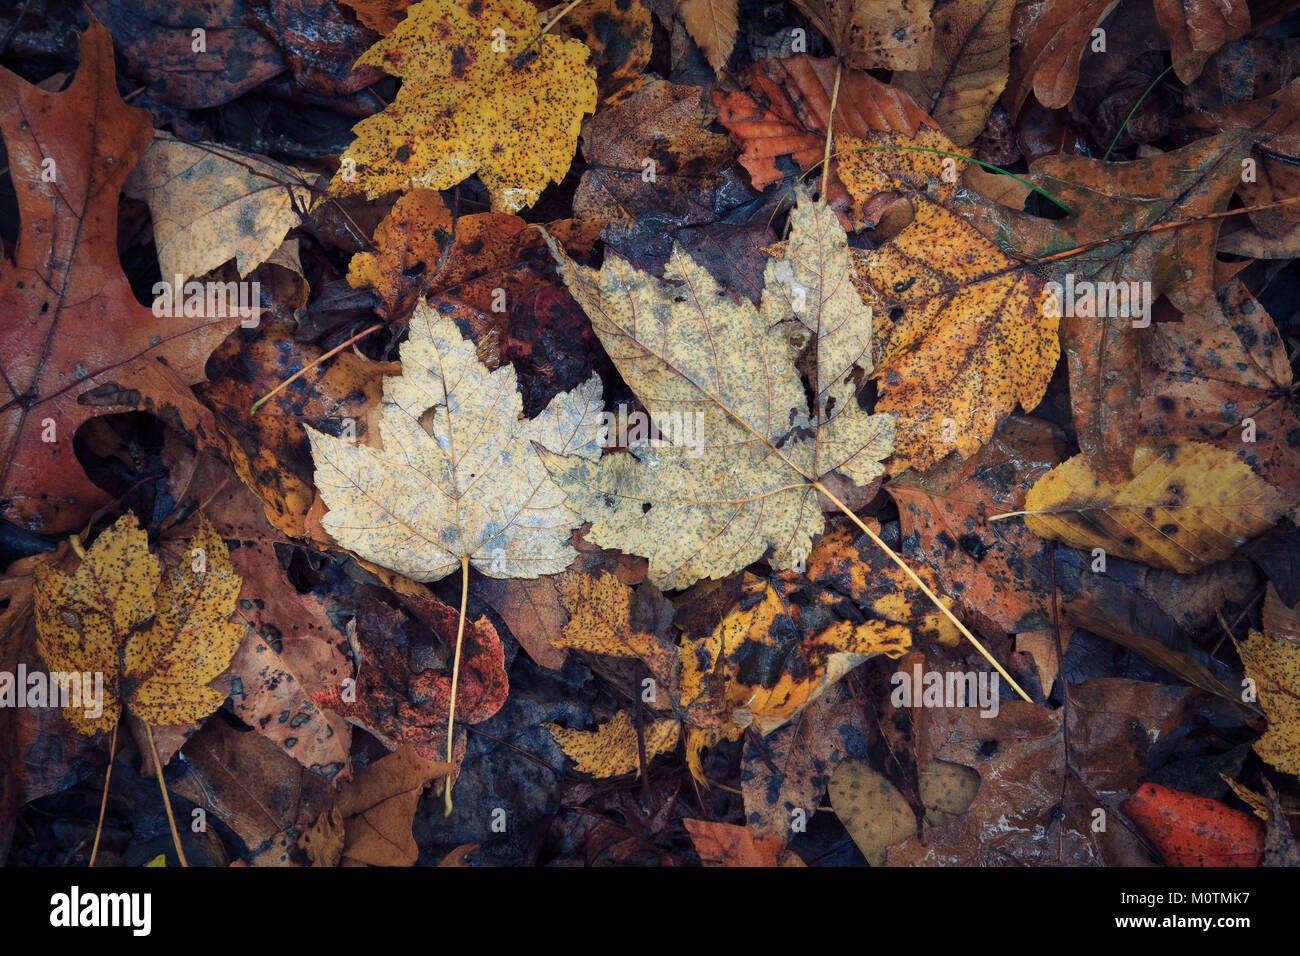 Maple leaves on forest floor Stock Photo